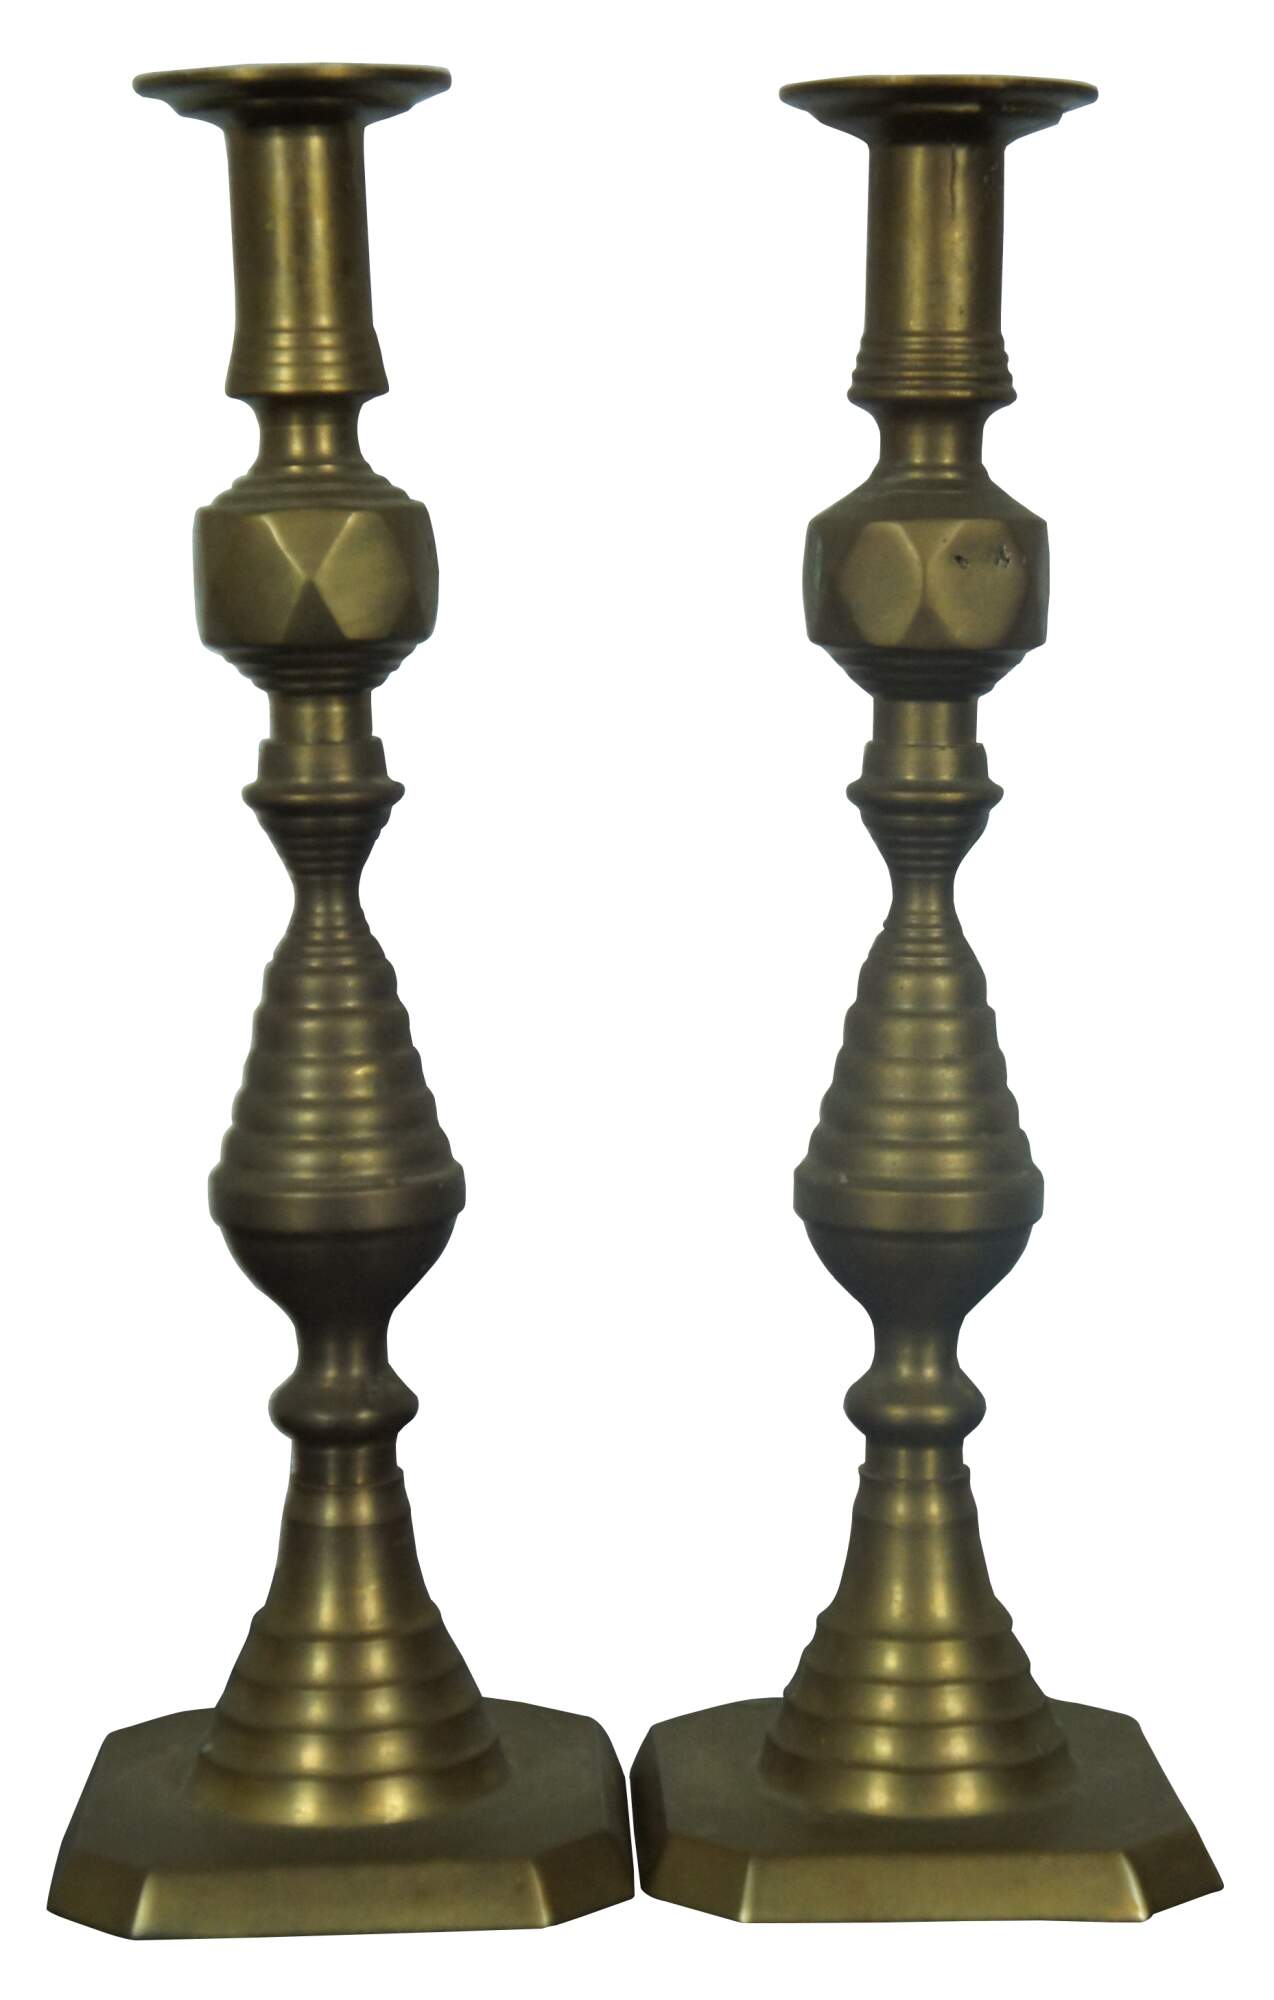 Andrea by Sadek Modernist Brass Beehive Candlesticks Candle